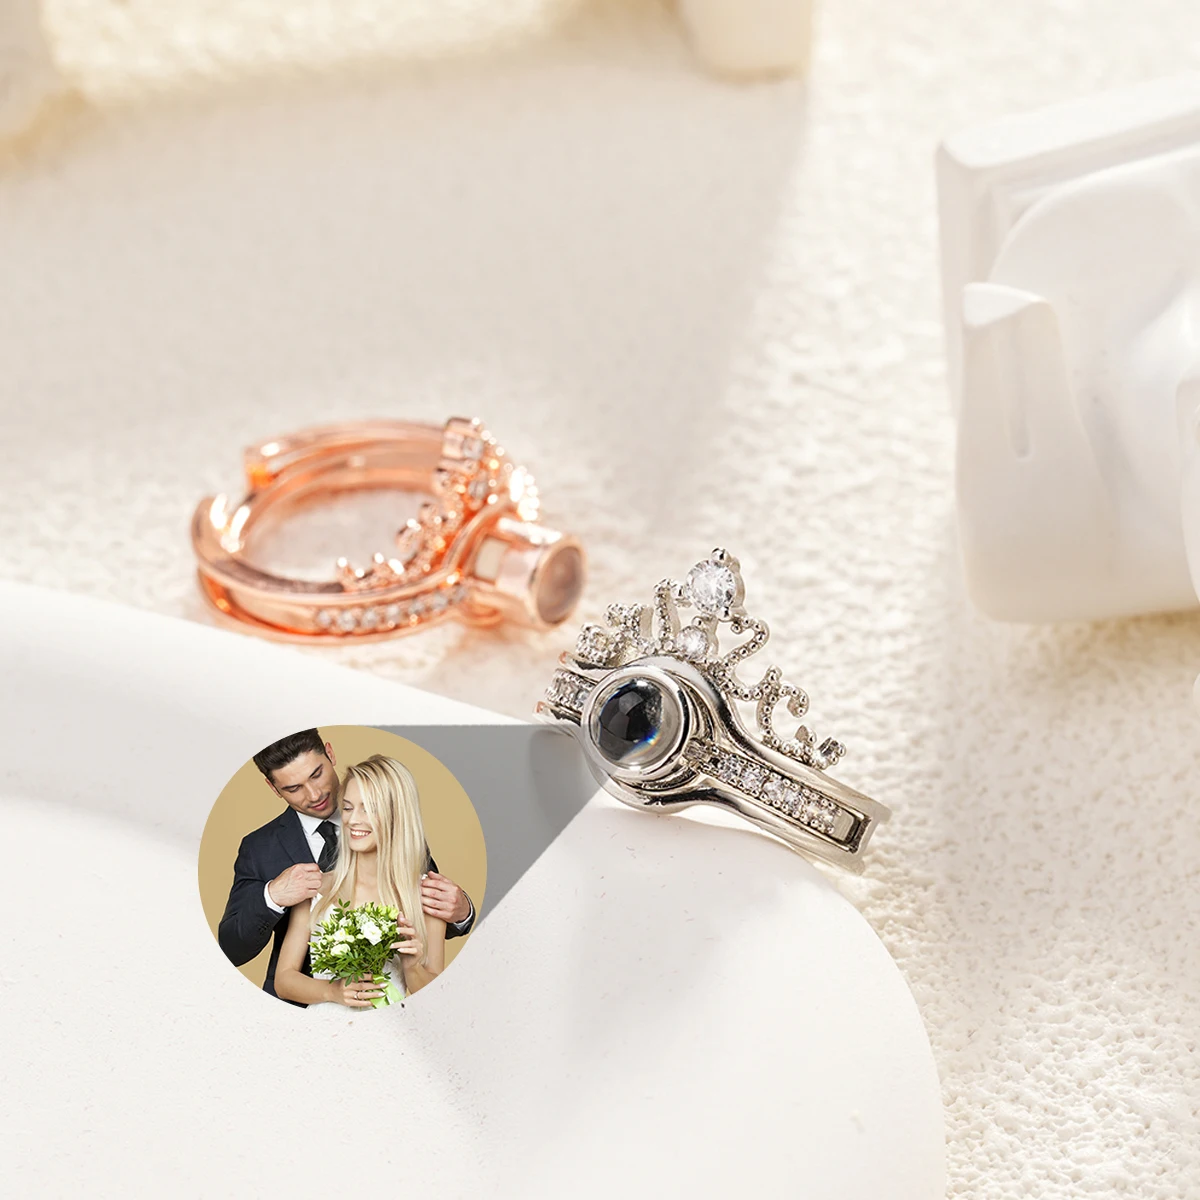 Crystal Crown Photo Custom Image Ring with Your Picture Family Memory Pet Personalized Projection Rings Valentine's Day Gift creative proposal rubik s cube ring box personalized valentine s day gift rubik s cube jewelry box ring box ring box for display